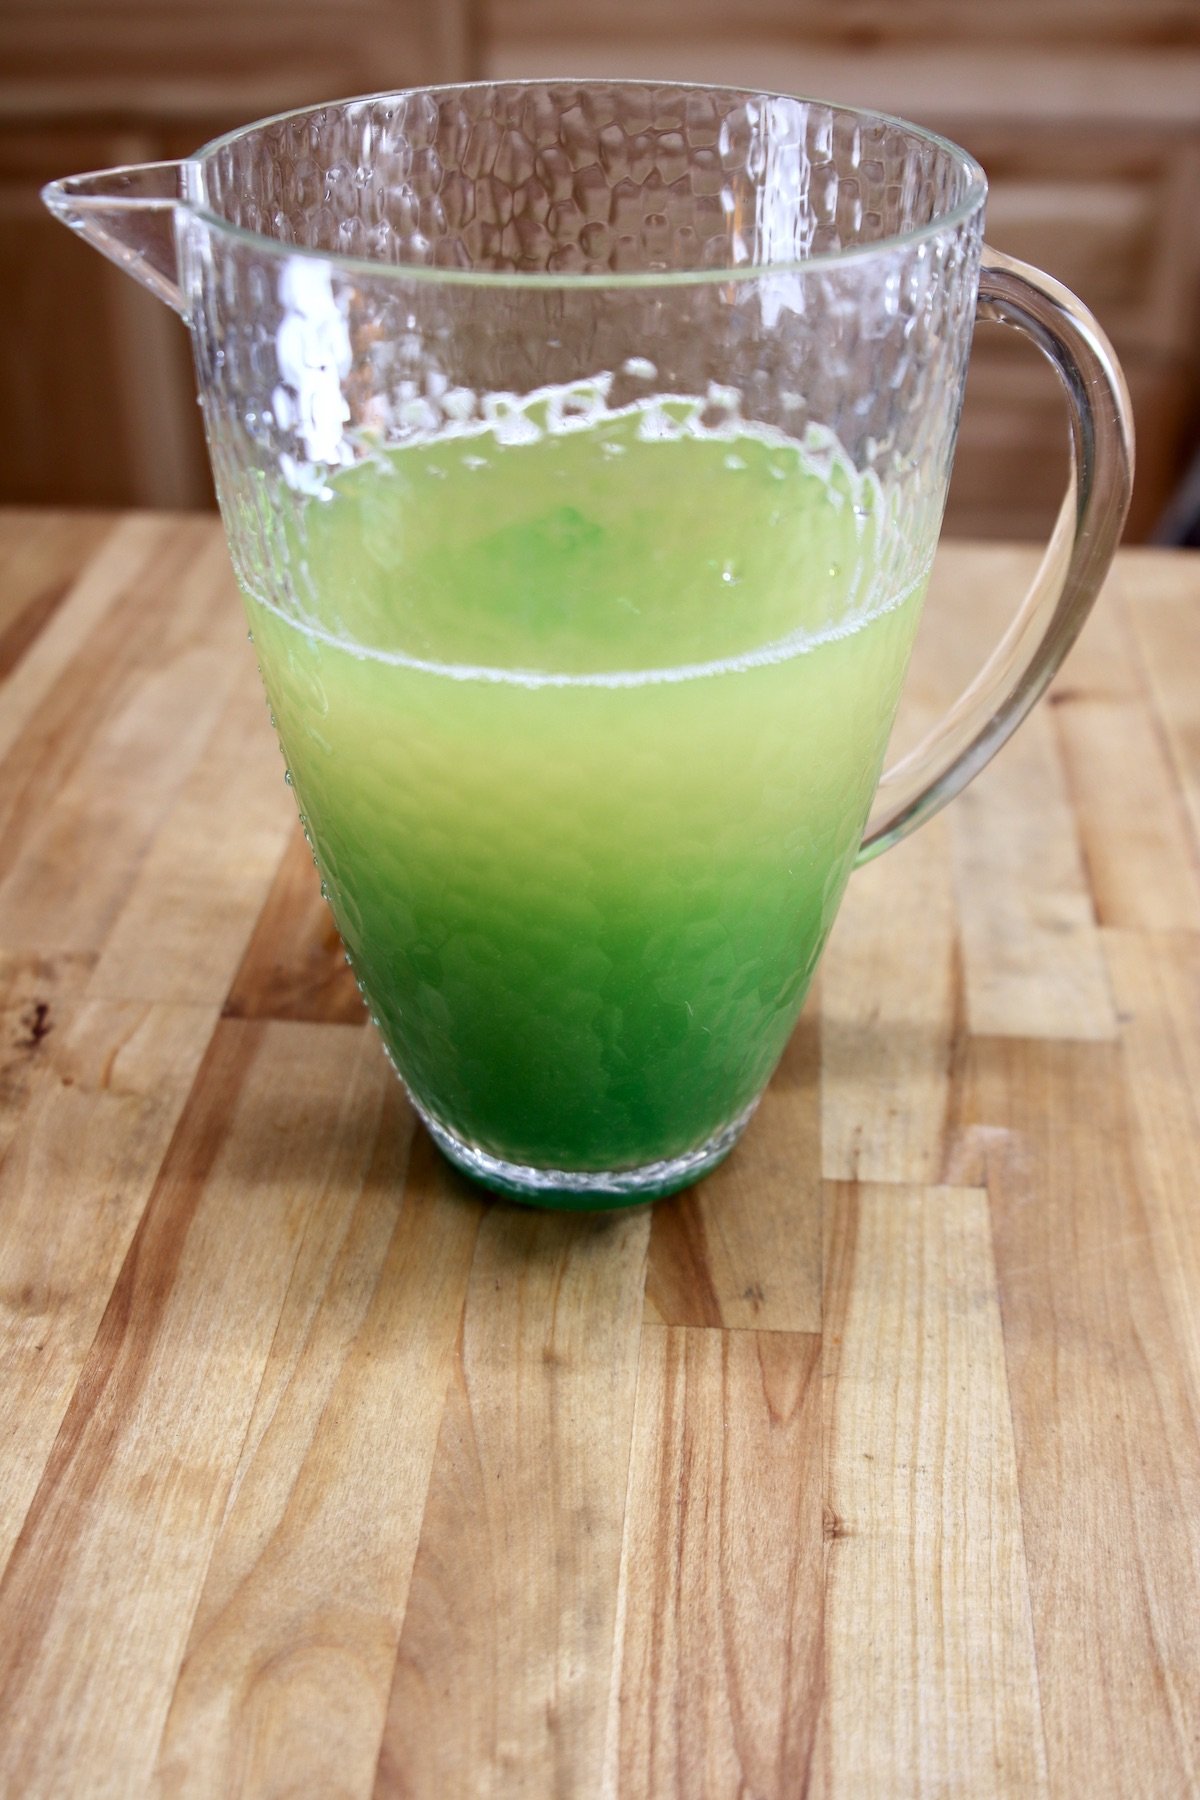 making green punch for Christmas in a pitcher